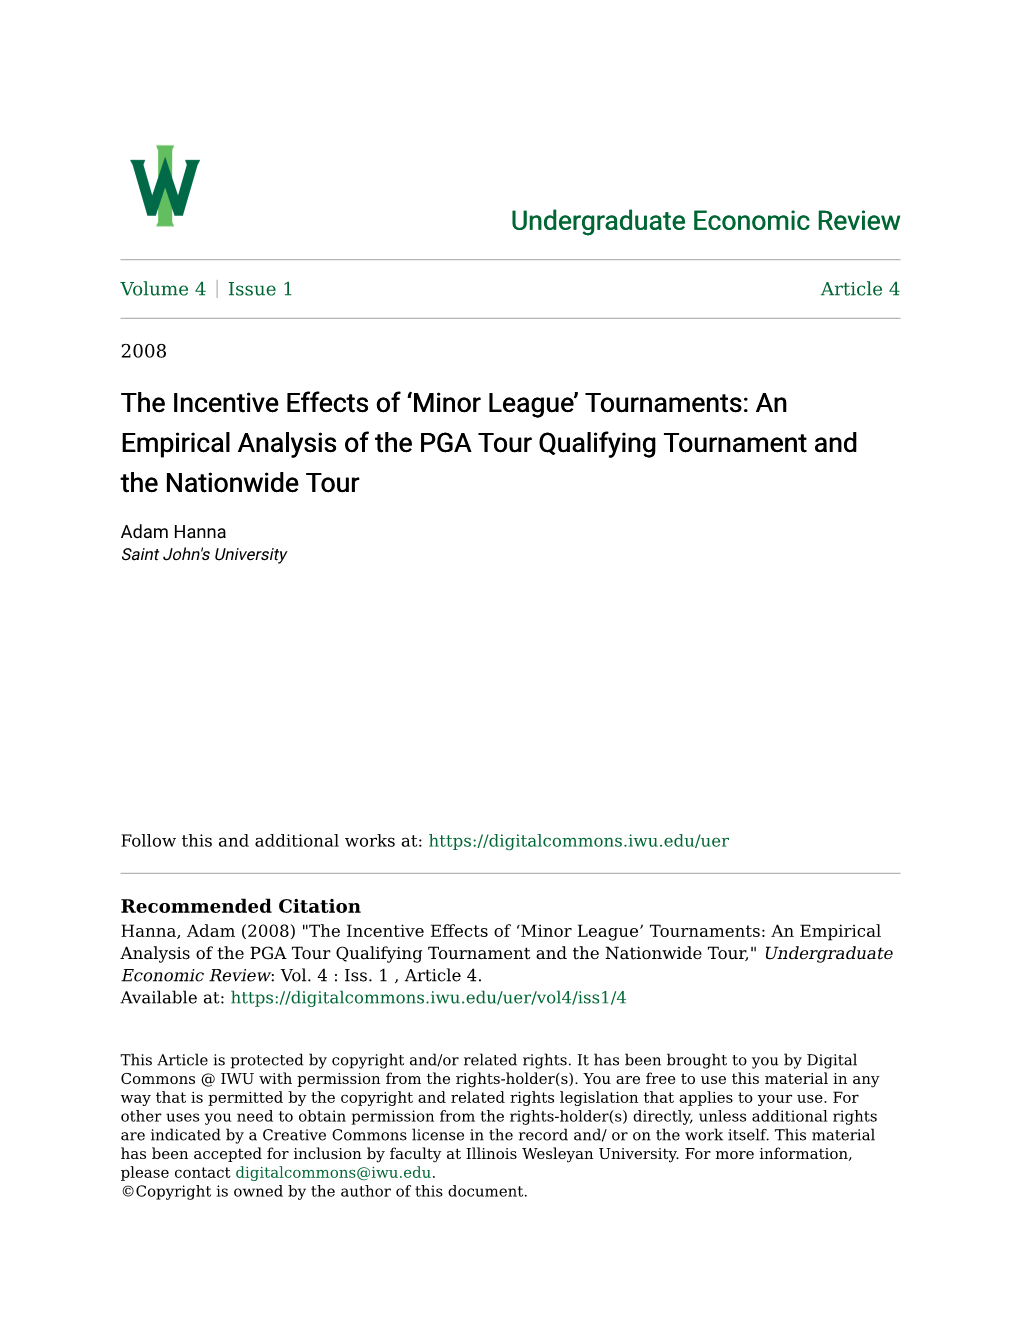 An Empirical Analysis of the PGA Tour Qualifying Tournament and the Nationwide Tour